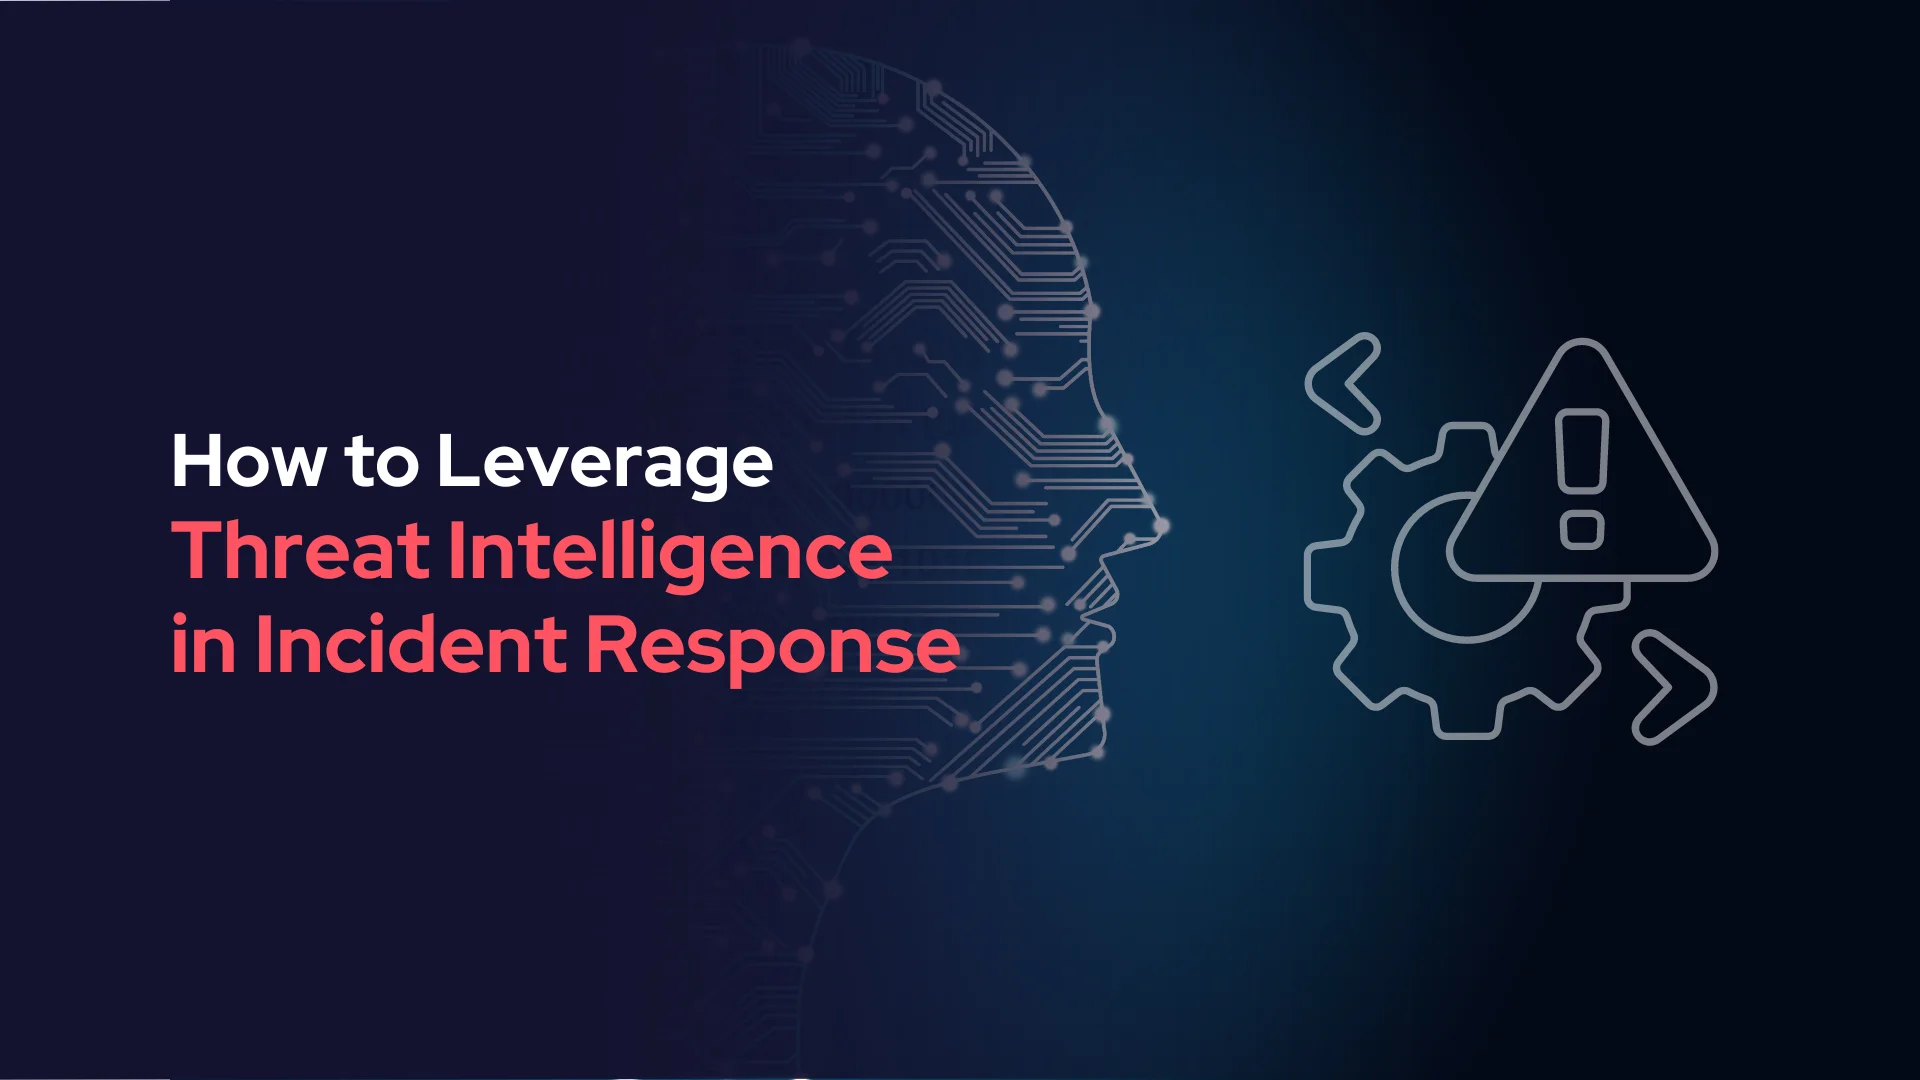 SOCRadar® Cyber Intelligence Inc. | How to Leverage Threat Intelligence in Incident Response